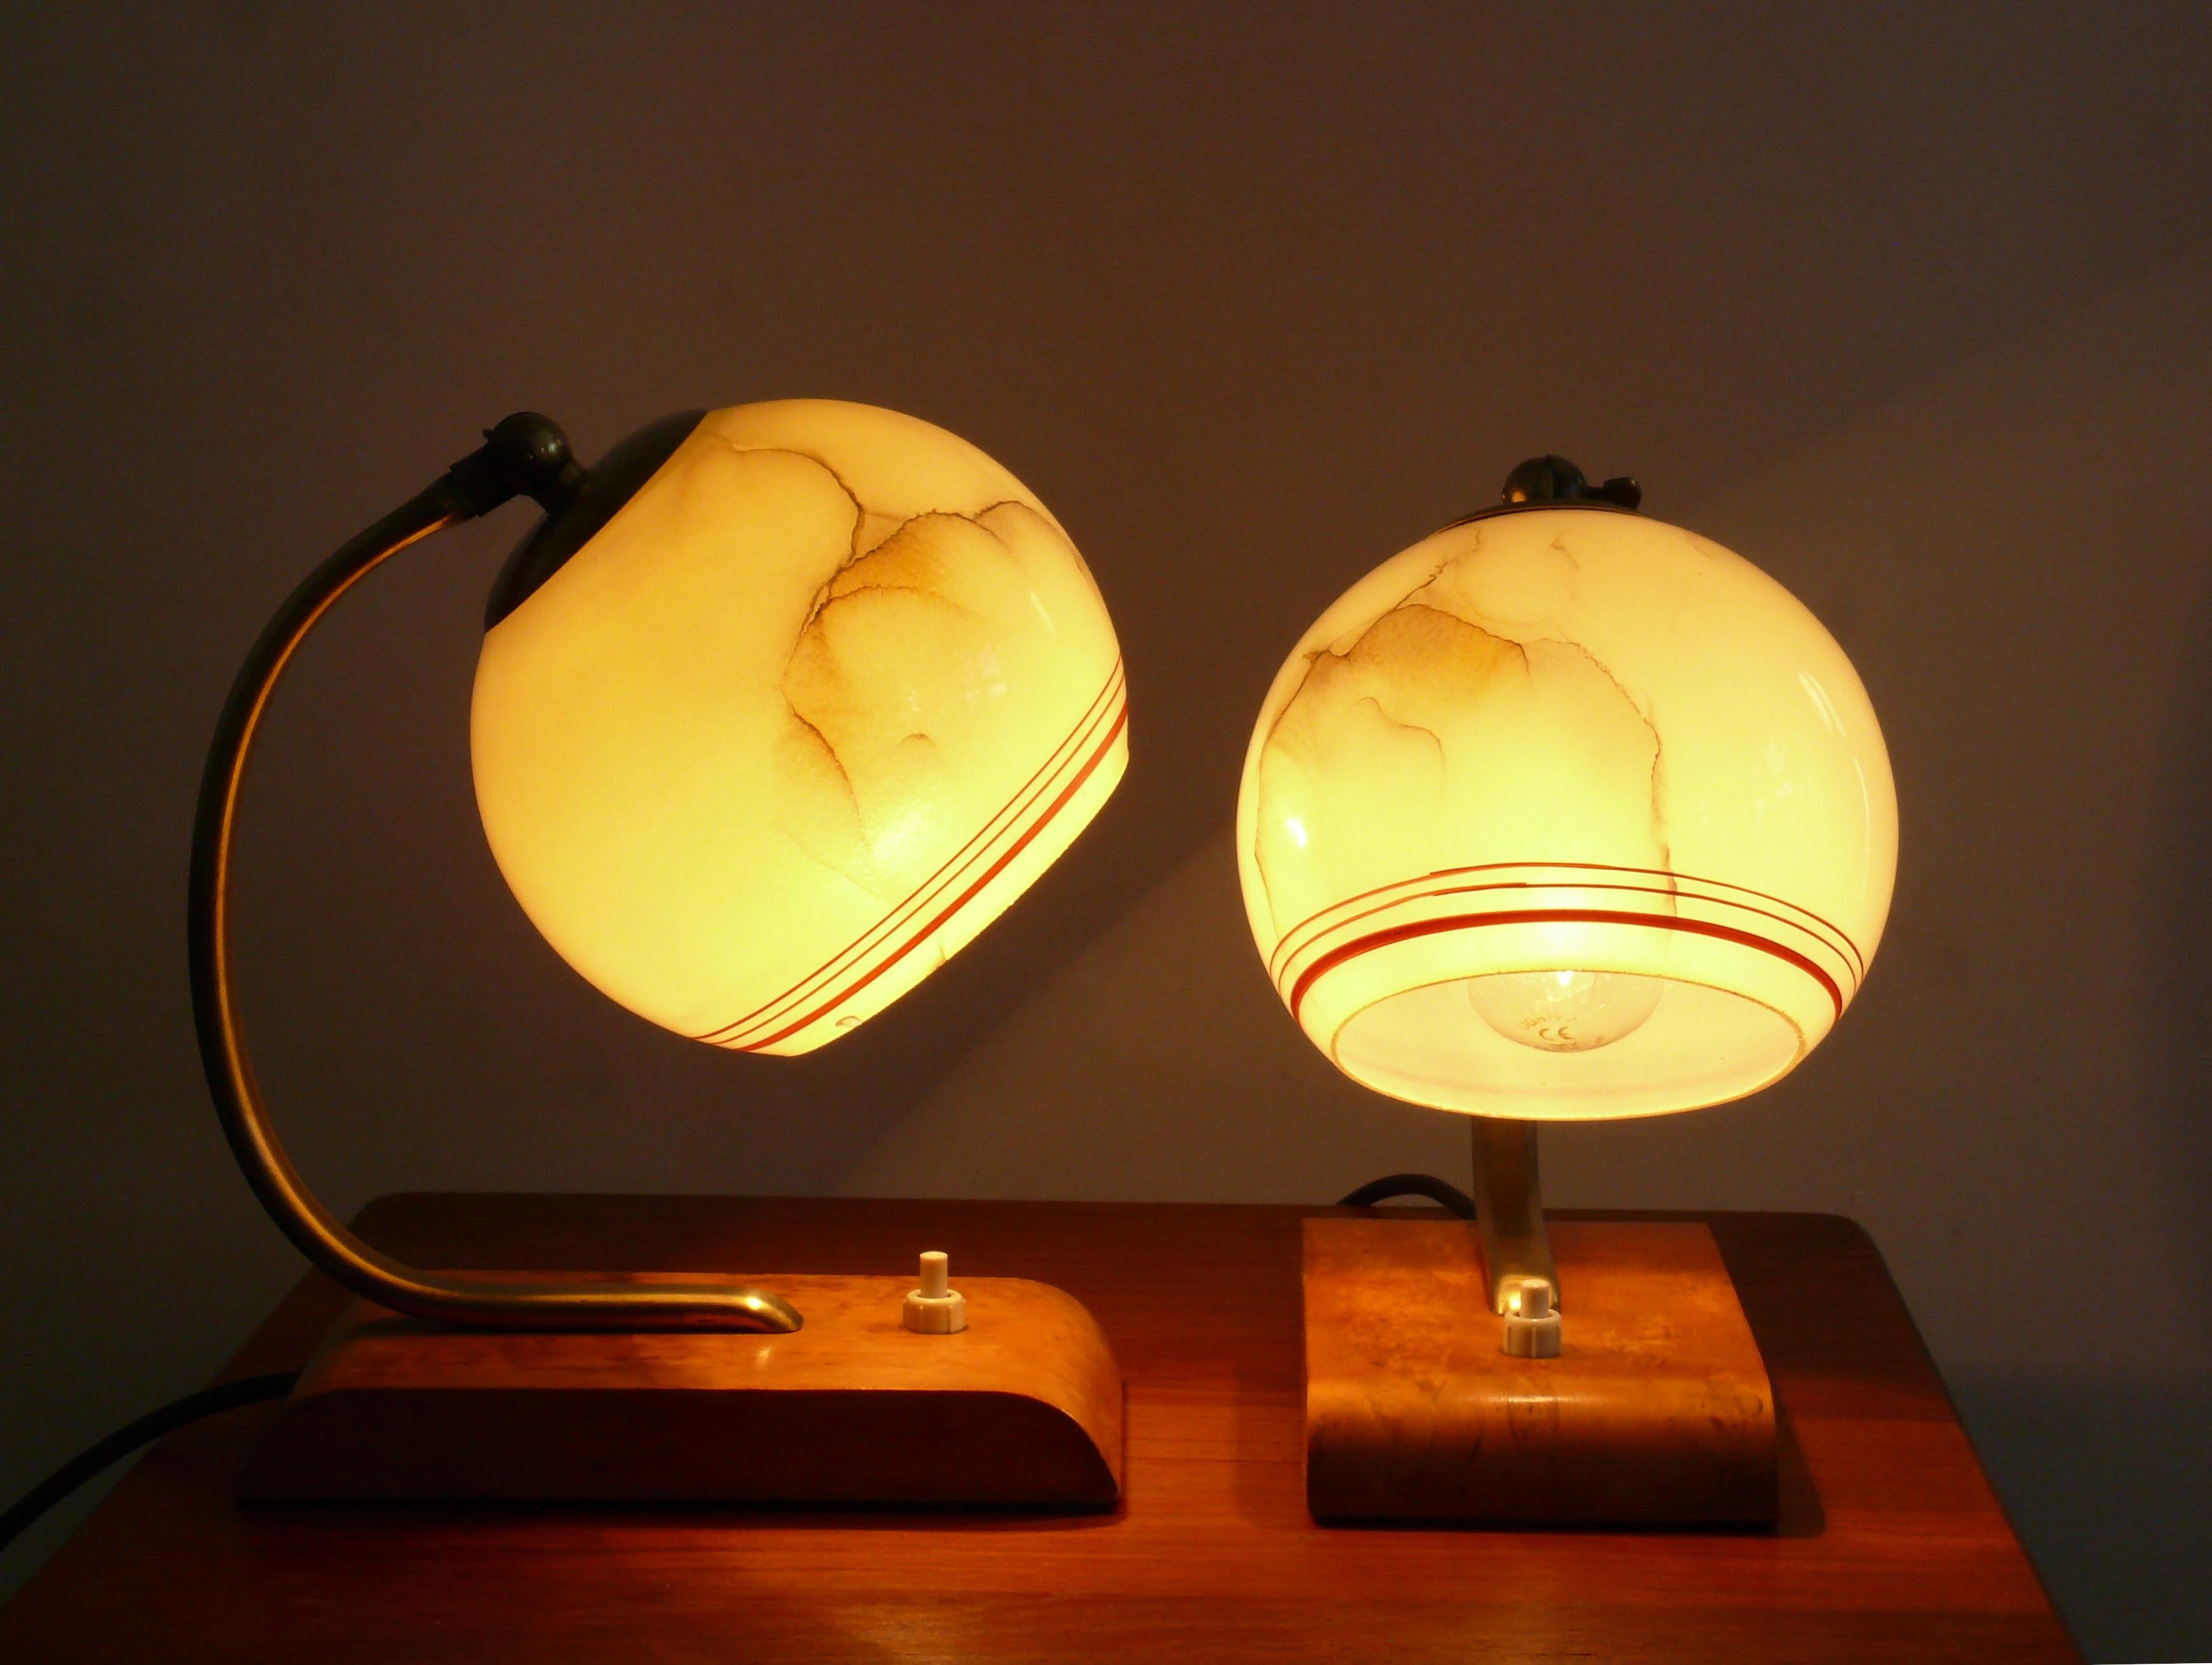 Well-preserved Art Deco table lamps from the 1930s - 1940s. The lights are made of brass and have a yellow spherical shade with radial decorative stripes. The shade can be adjusted via a joint with a knurled screw. Brass frame and ring. The feet are